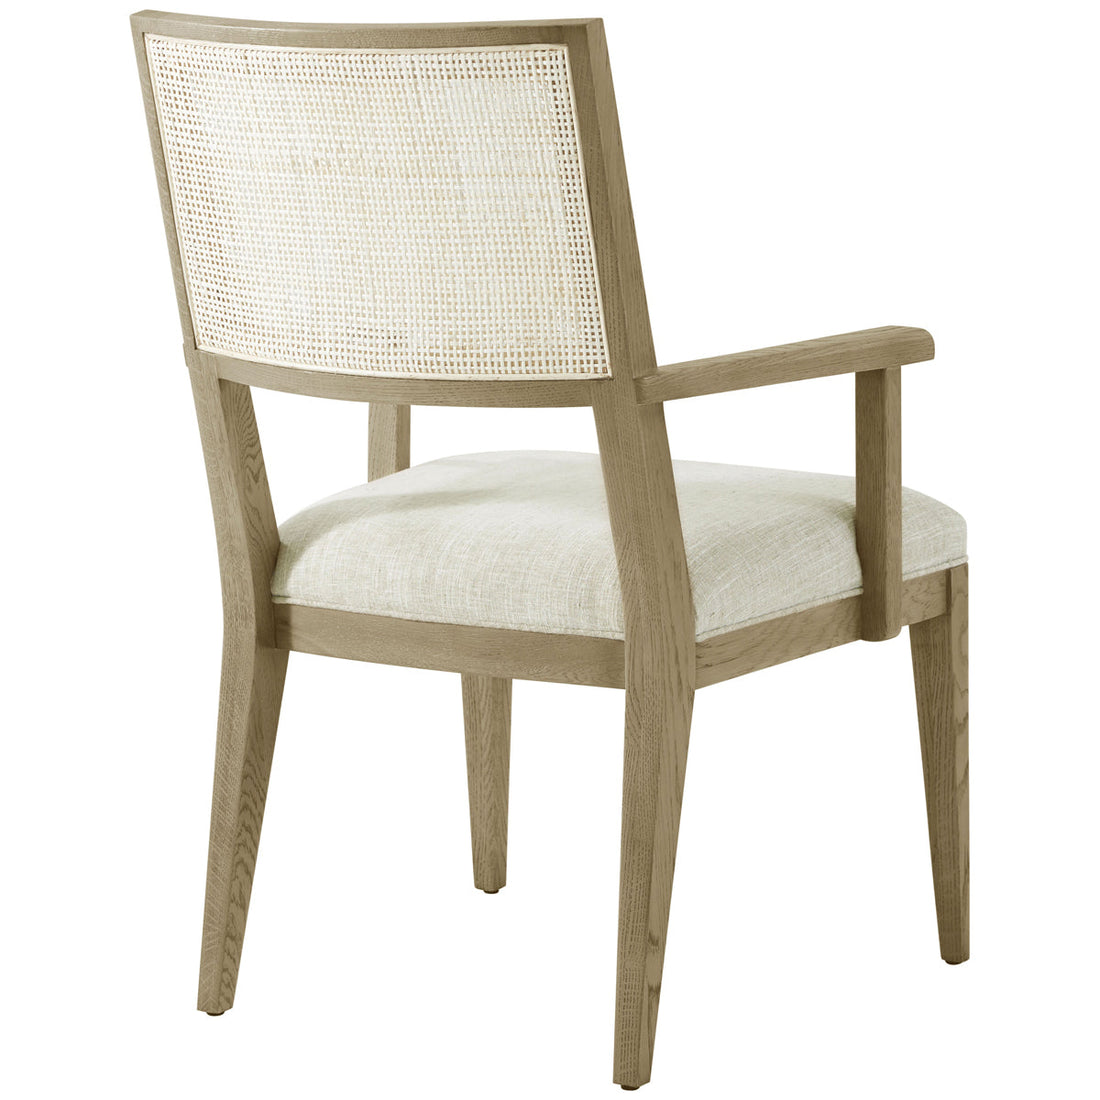 Theodore Alexander Catalina Dining Arm Chair, Set of 2